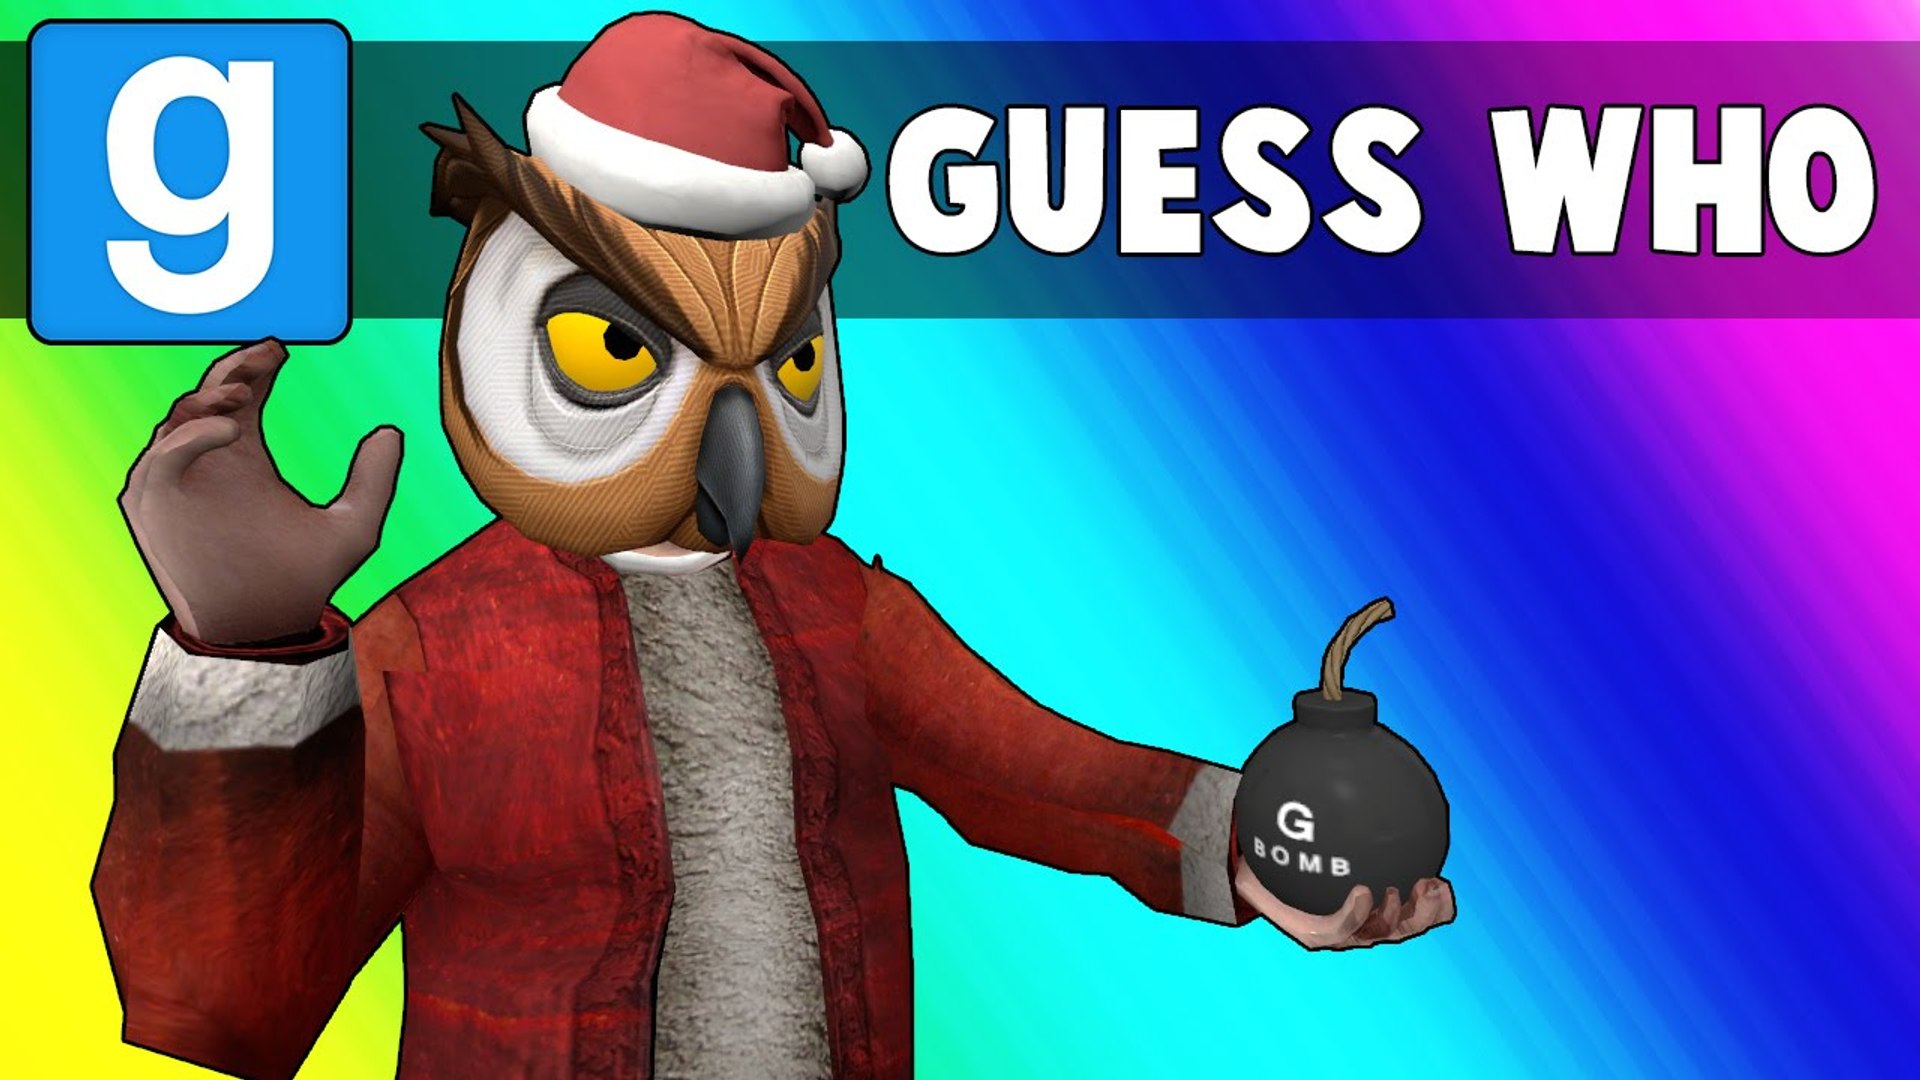 Gmod Guess Who Funny Moments - on Santa s Lap! (Garry s Mod) - video